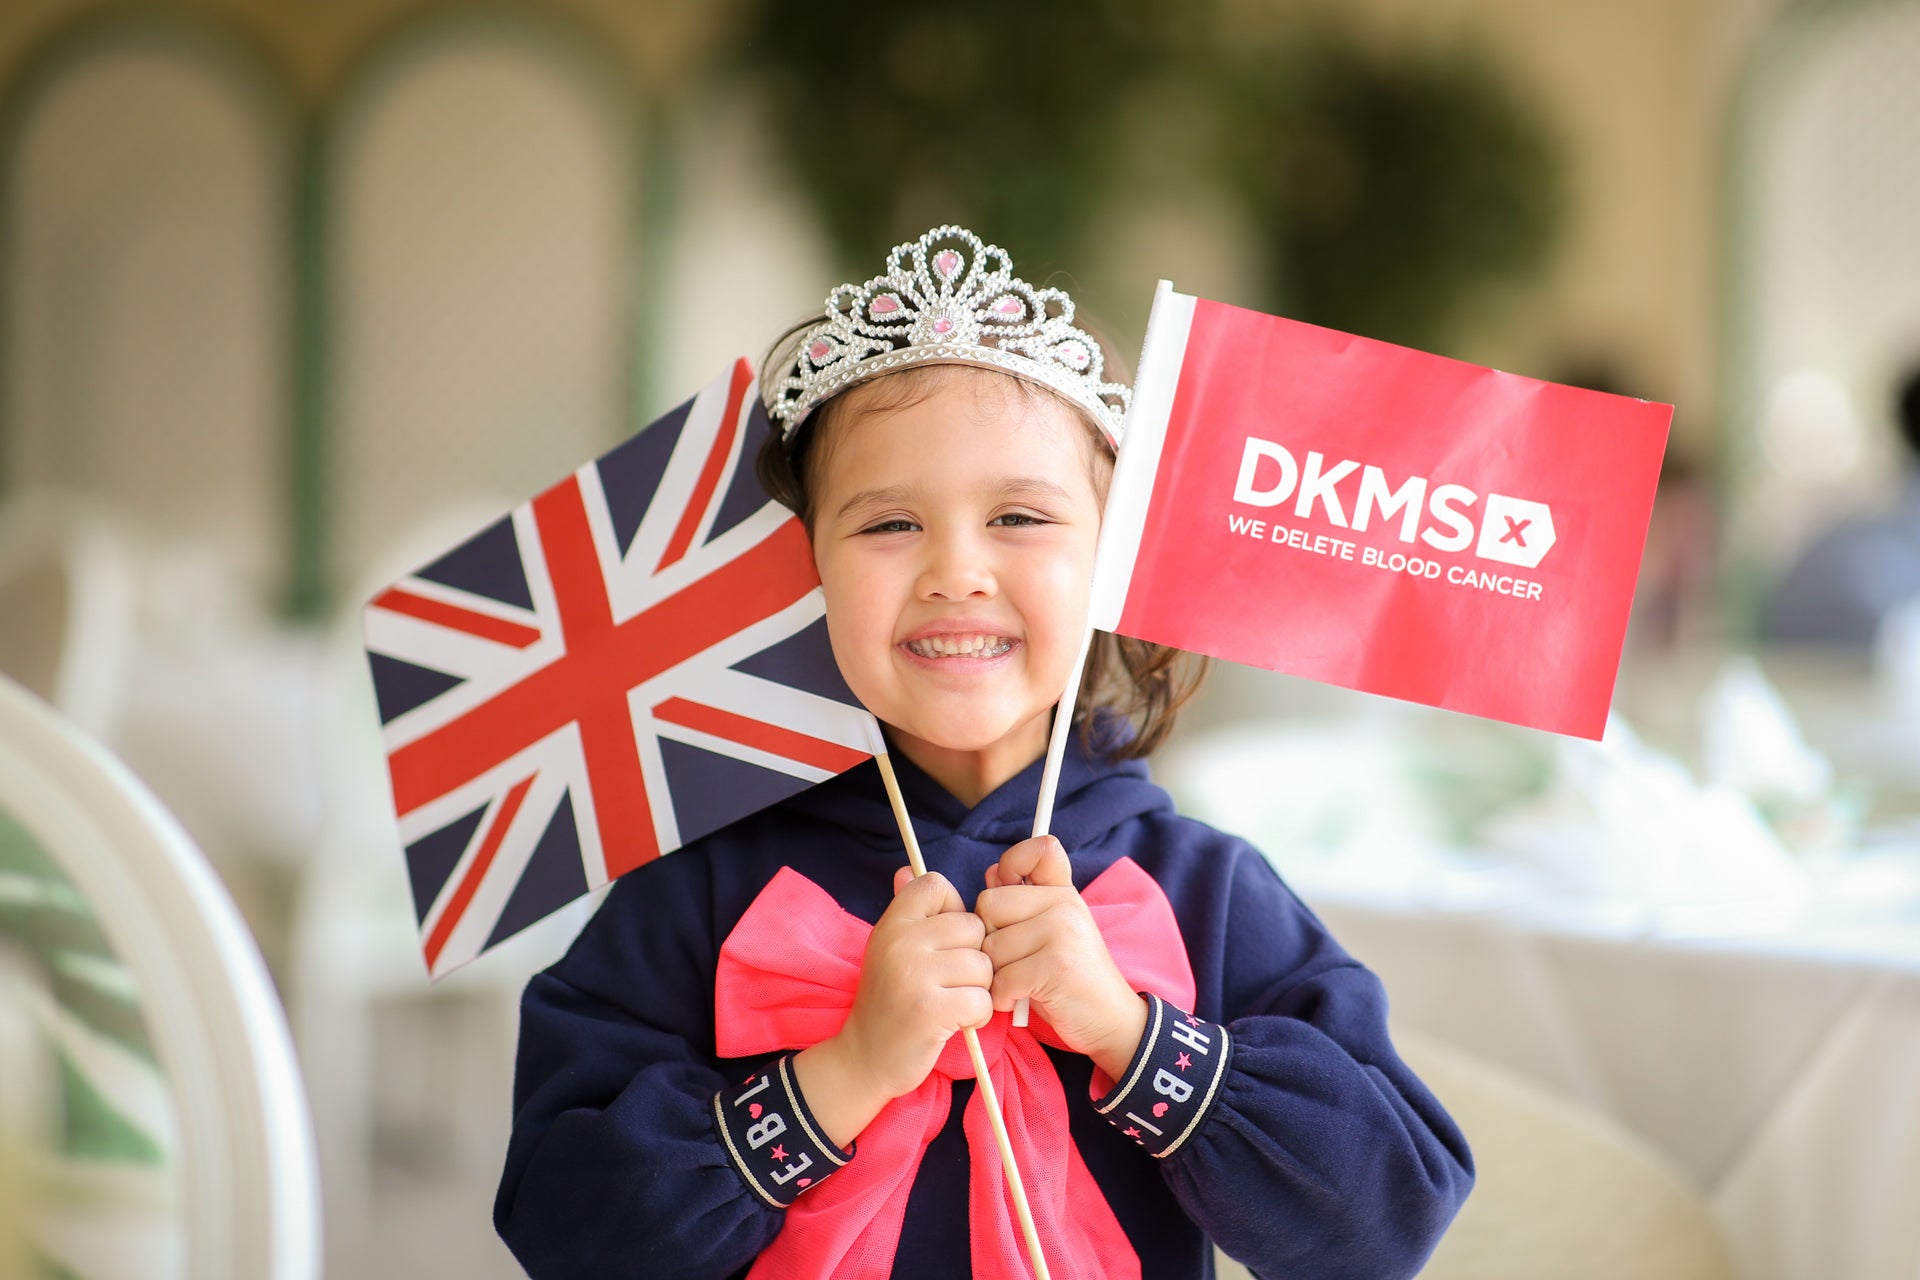 Livia with a Union Jack and DKMS flag